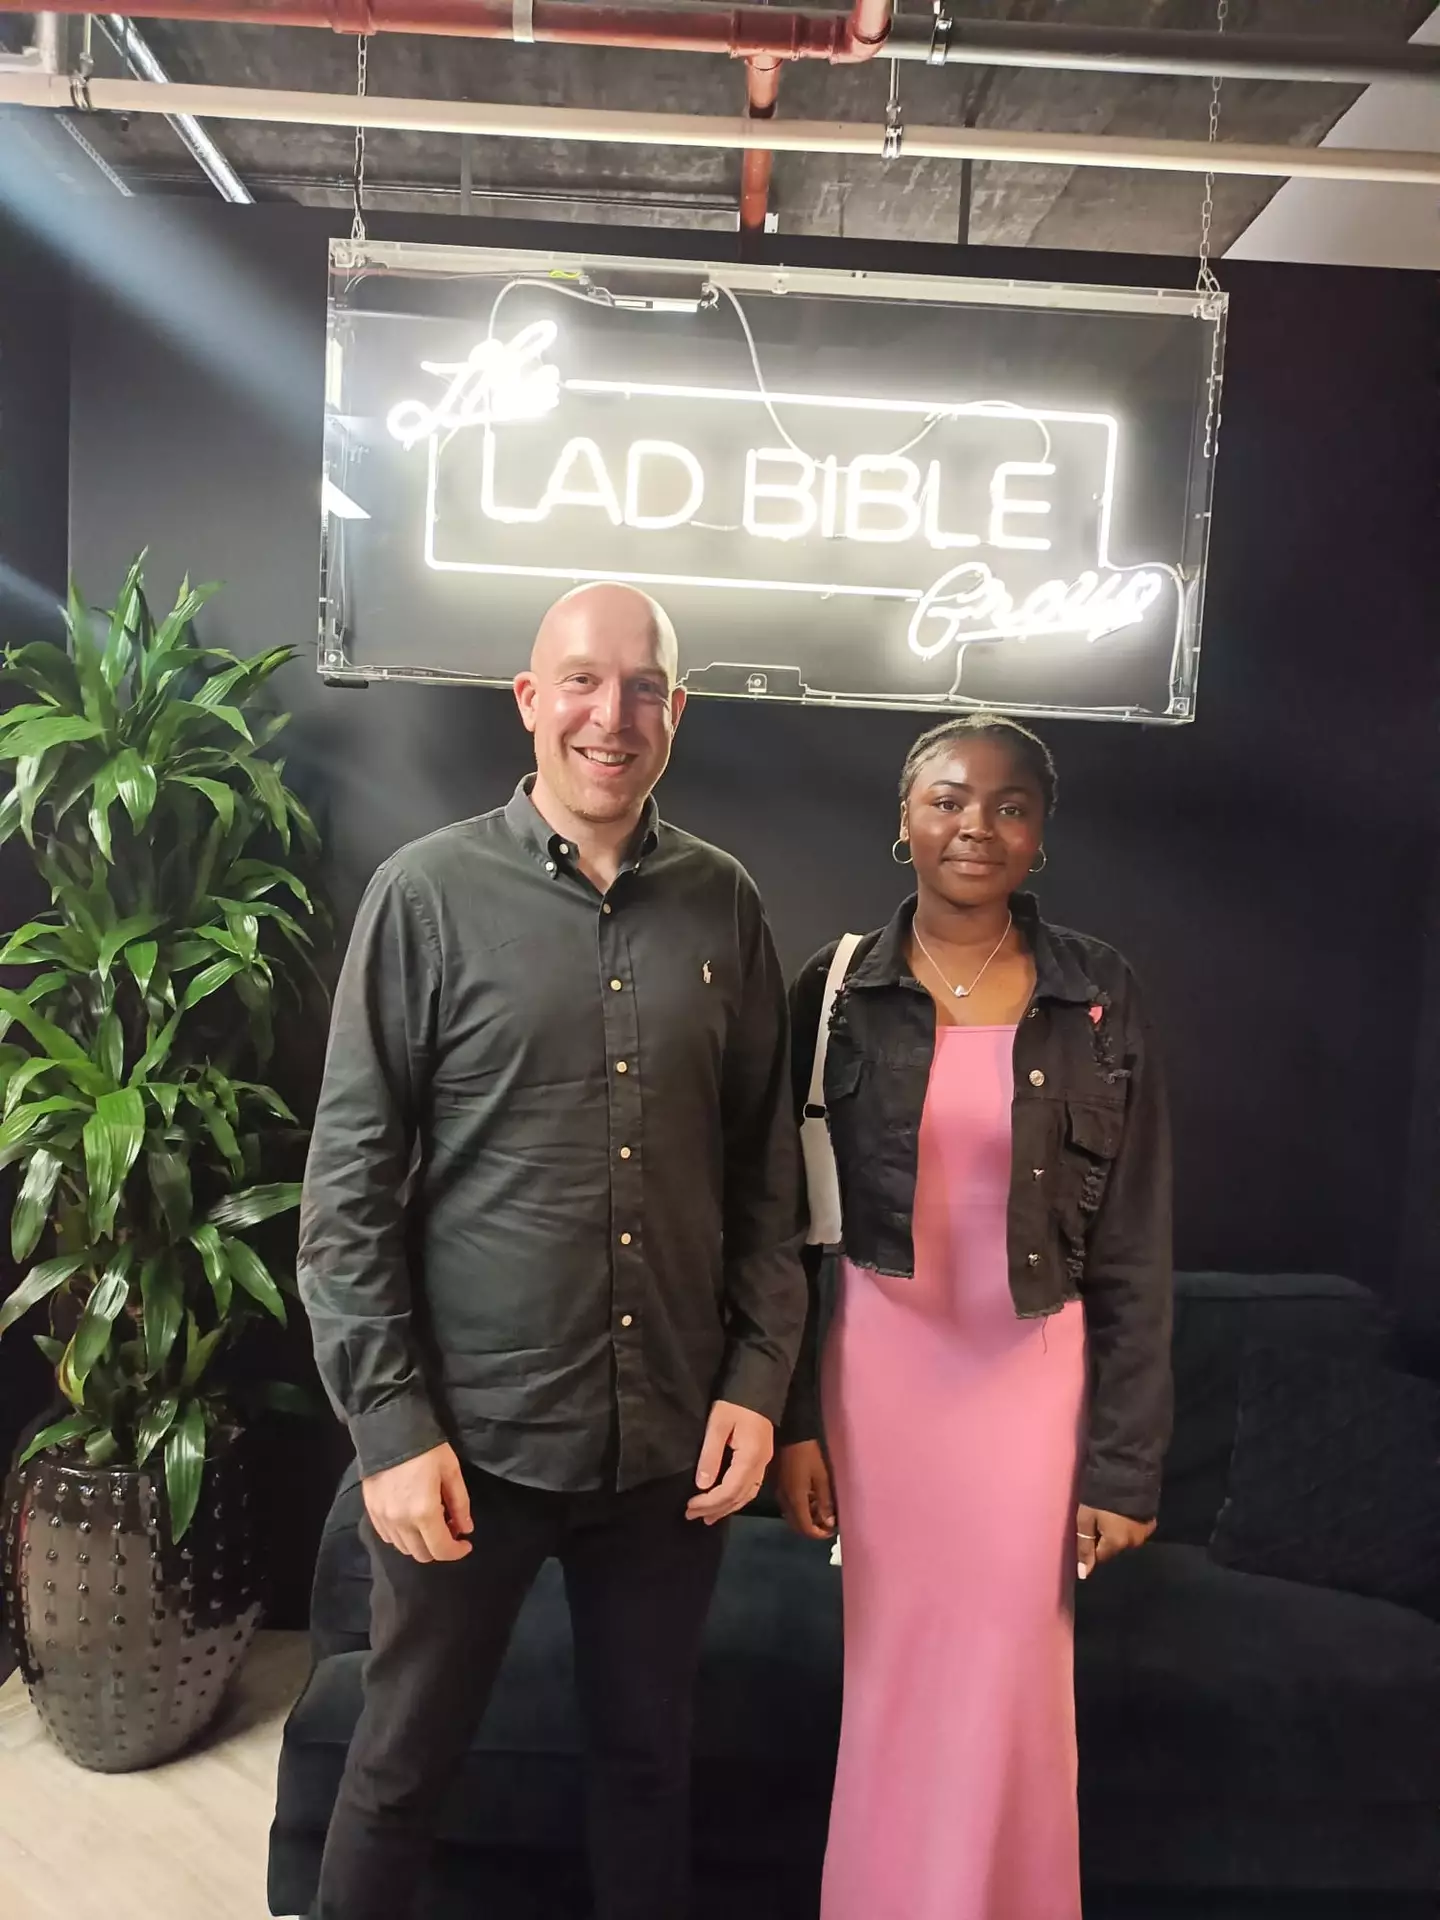 LADbible Group CEO Solly Solomou and 17-year-old Dunmi.